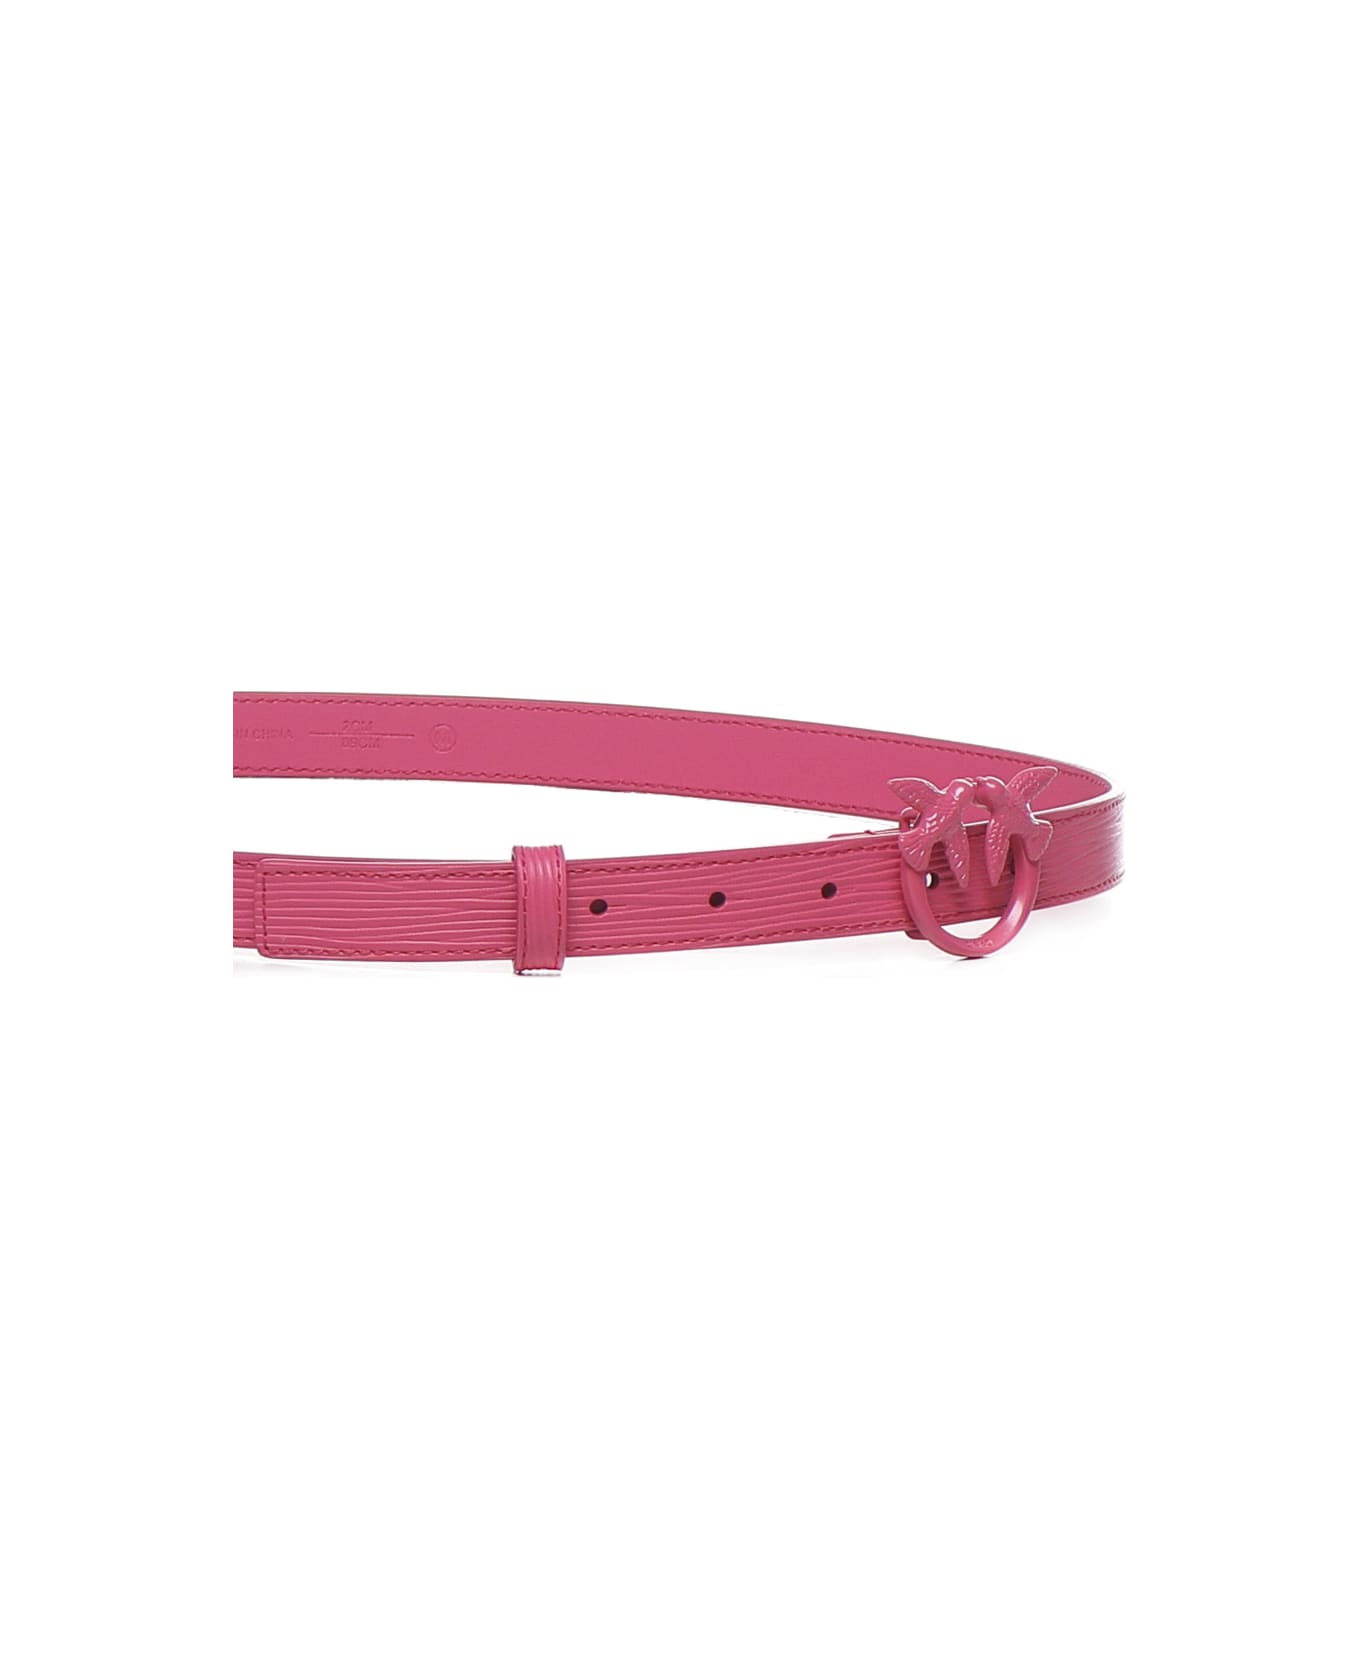 Pinko Leather Belt With Love Birds Buckle - Fucsia